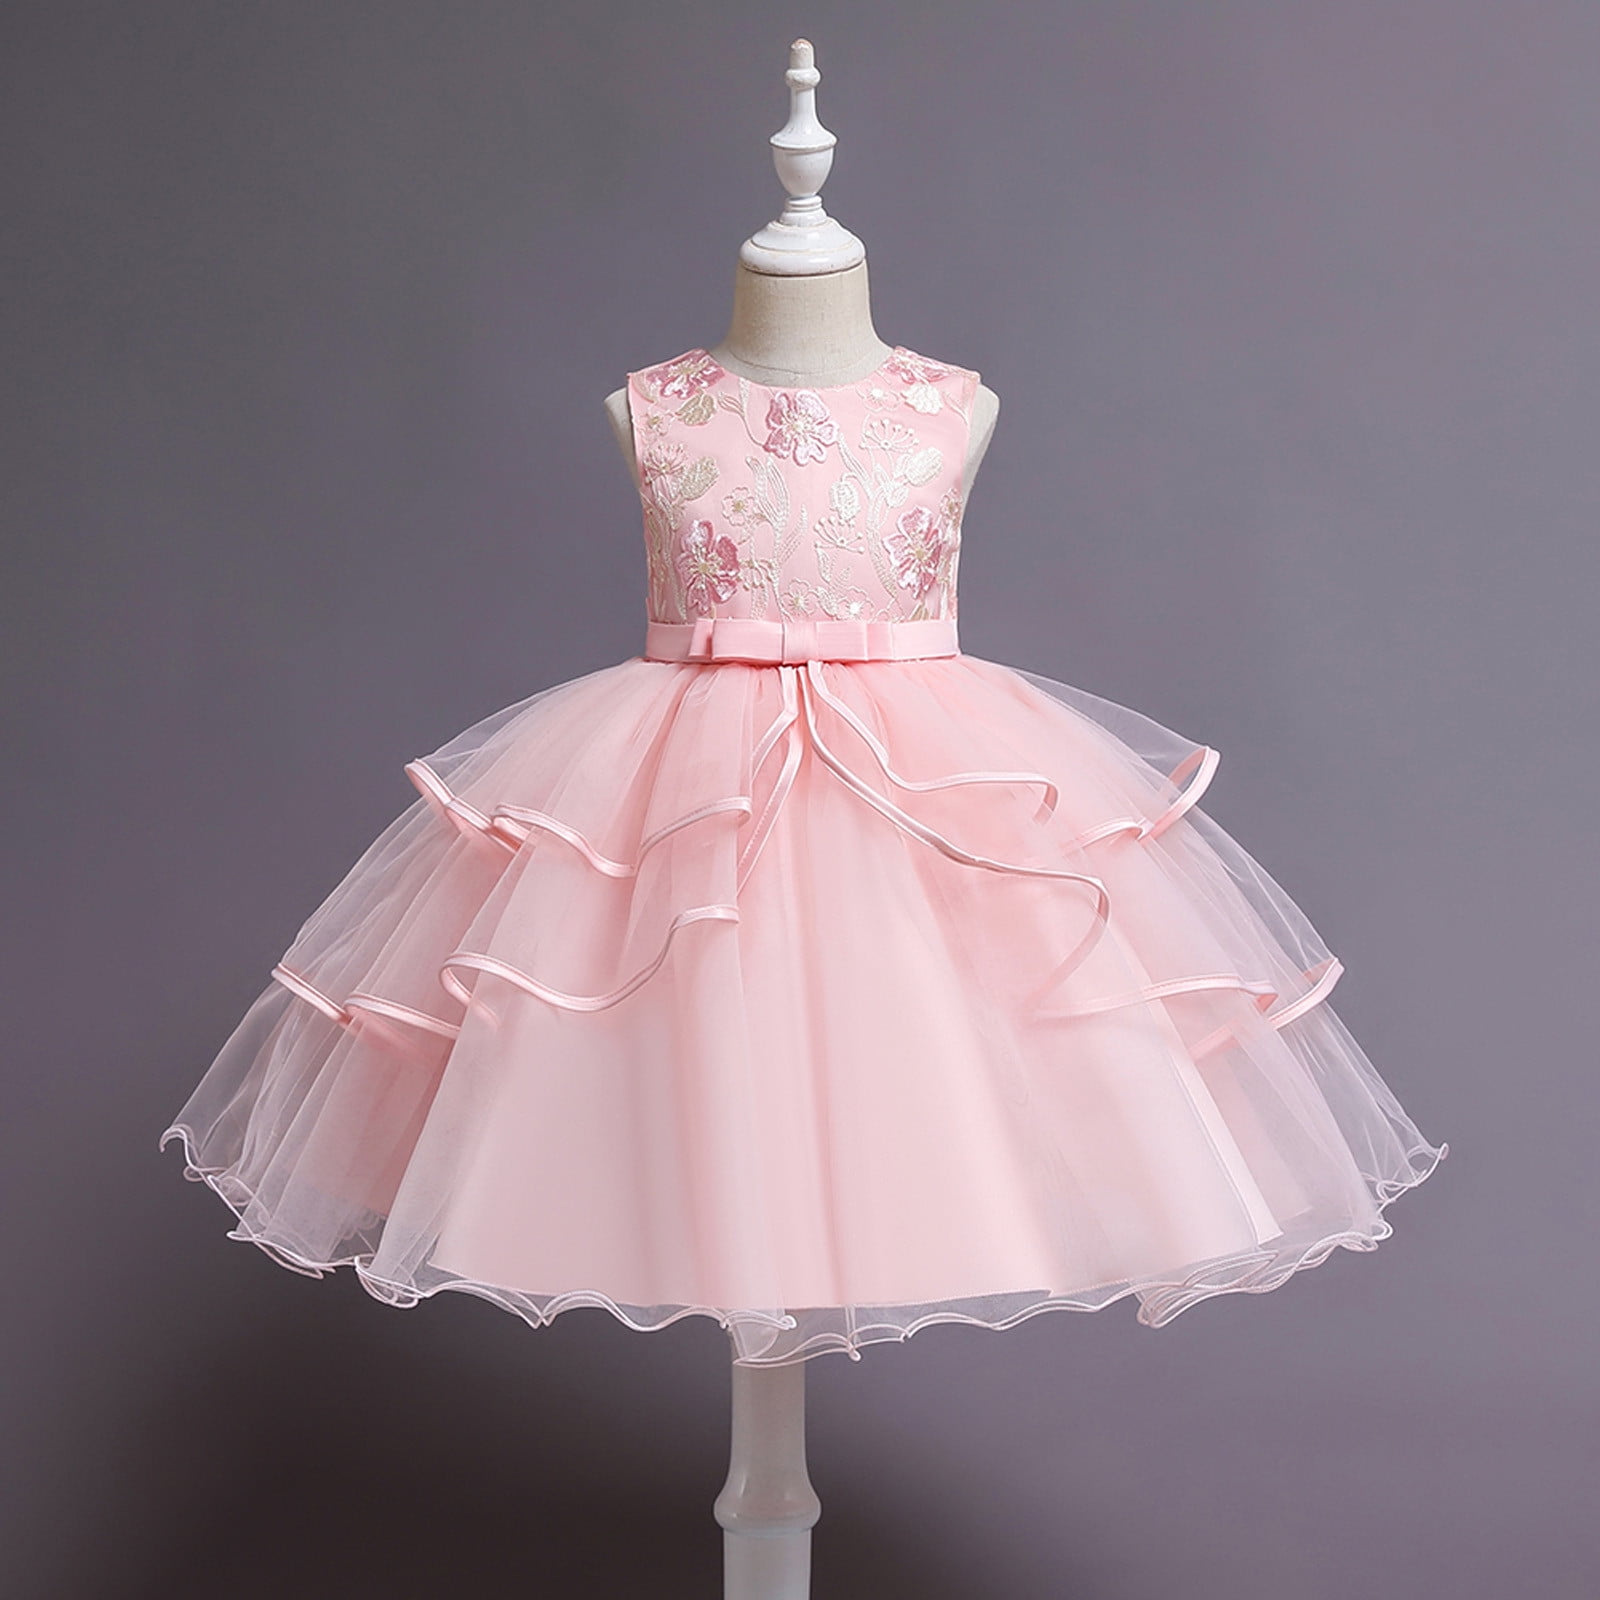 B91xZ Party Dresses For Girls Toddler Clothes Gown Girl Party Princess ...